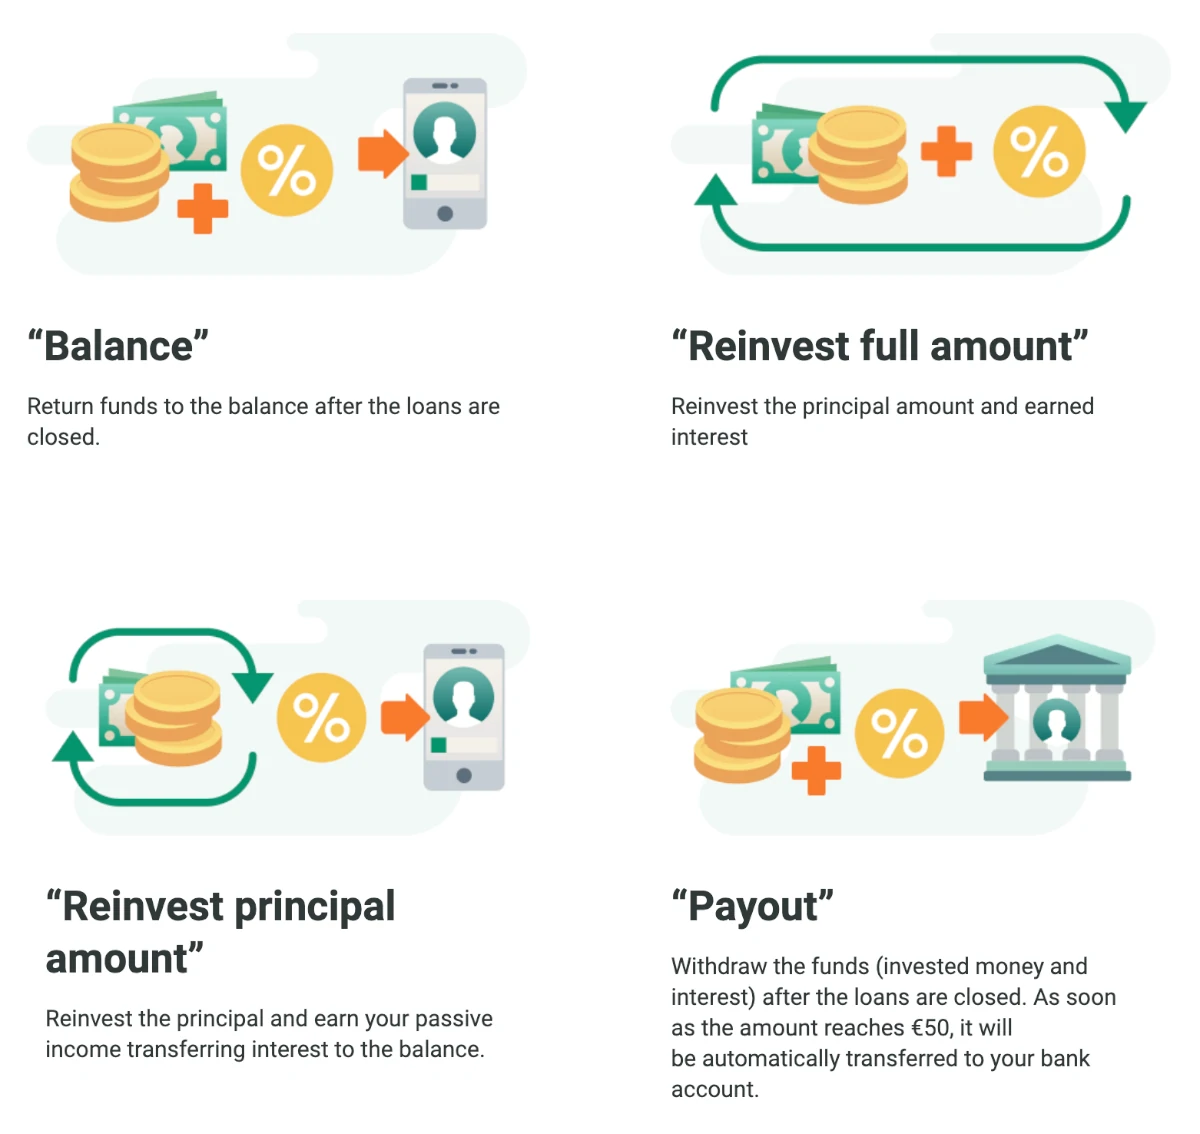 Illustration of the four different Robocash income options called Balance, Reinvest full amount, Reinvest principal amount and Payout